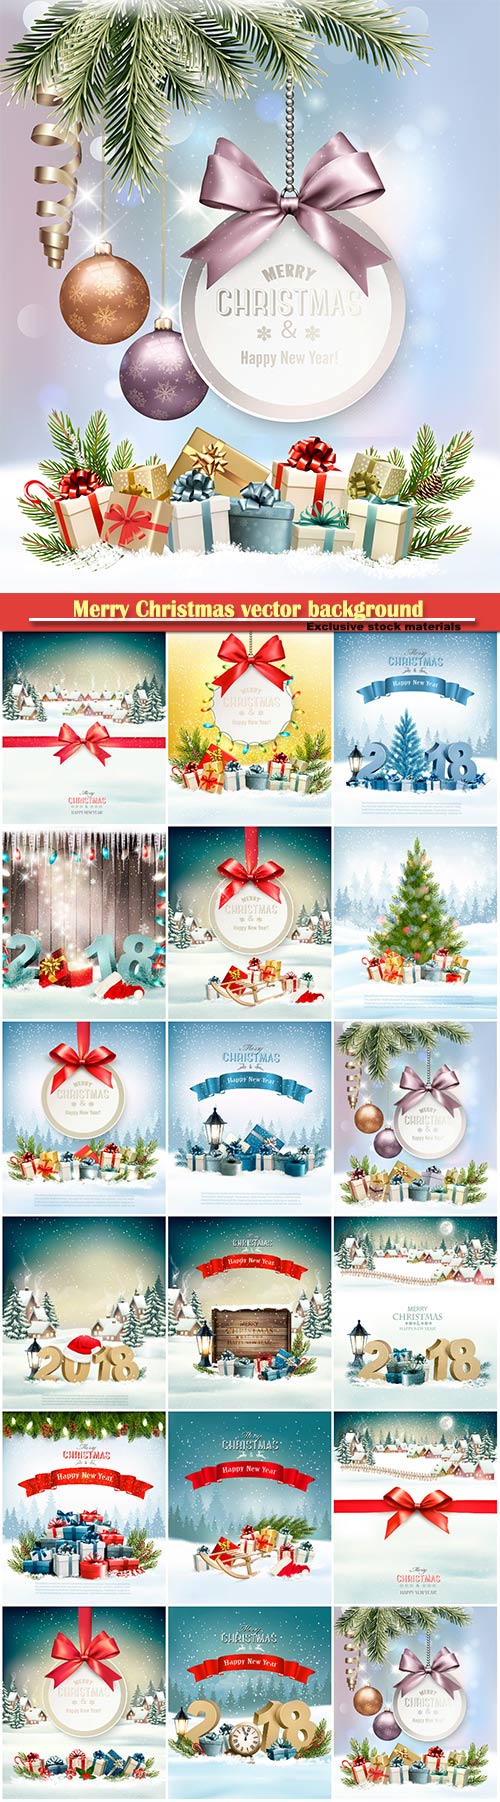 Merry Christmas vector background with branches of tree and colorful gift boxes